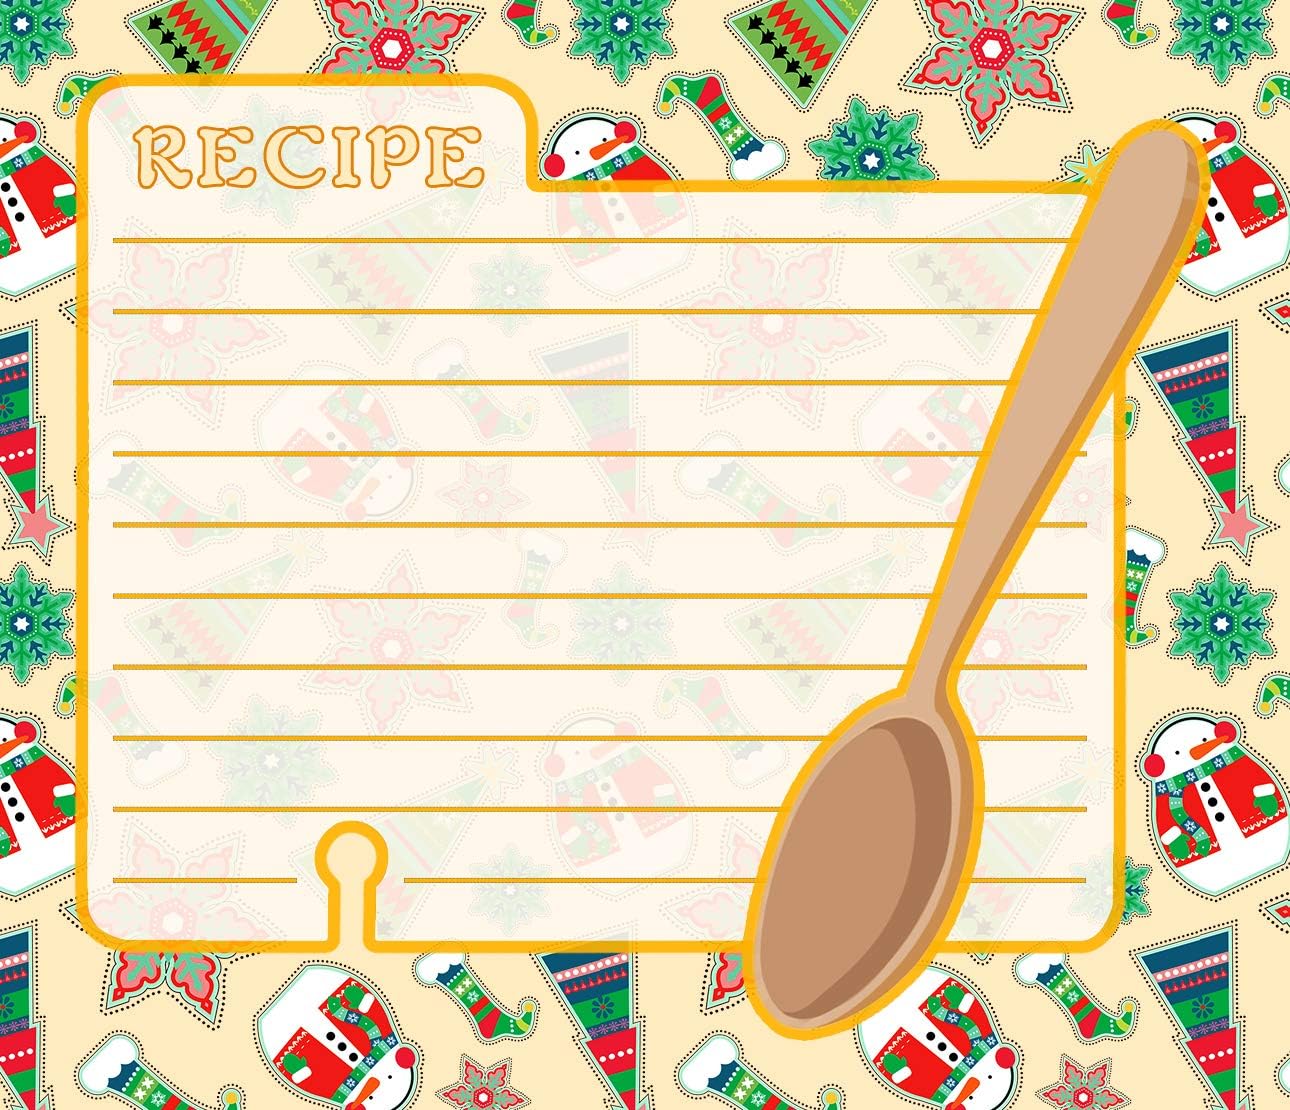 Christmas - Holiday Baking Kitchen Linen Set (6 Piece) - 2 Kitchen Towel, 2 Pot Holders, 1 Oven Mitt, 1 Magnetic Dry Erase Recipe Planner (Style 04)